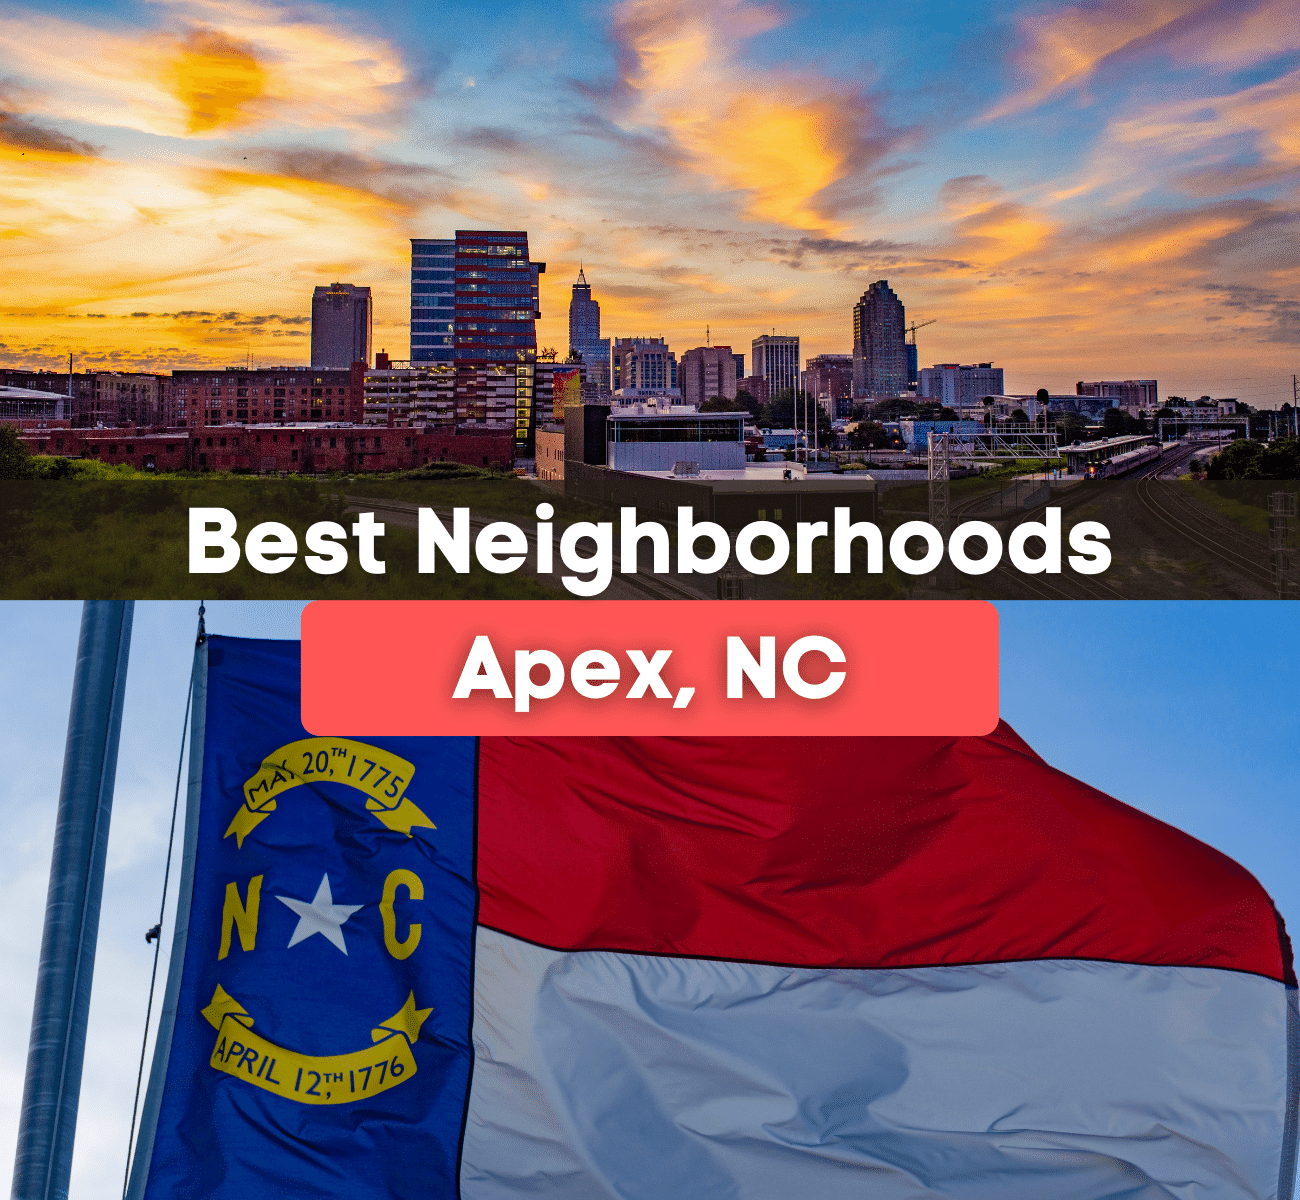 Best Neighborhoods in Apex, North Carolina - Where are the best places to live?